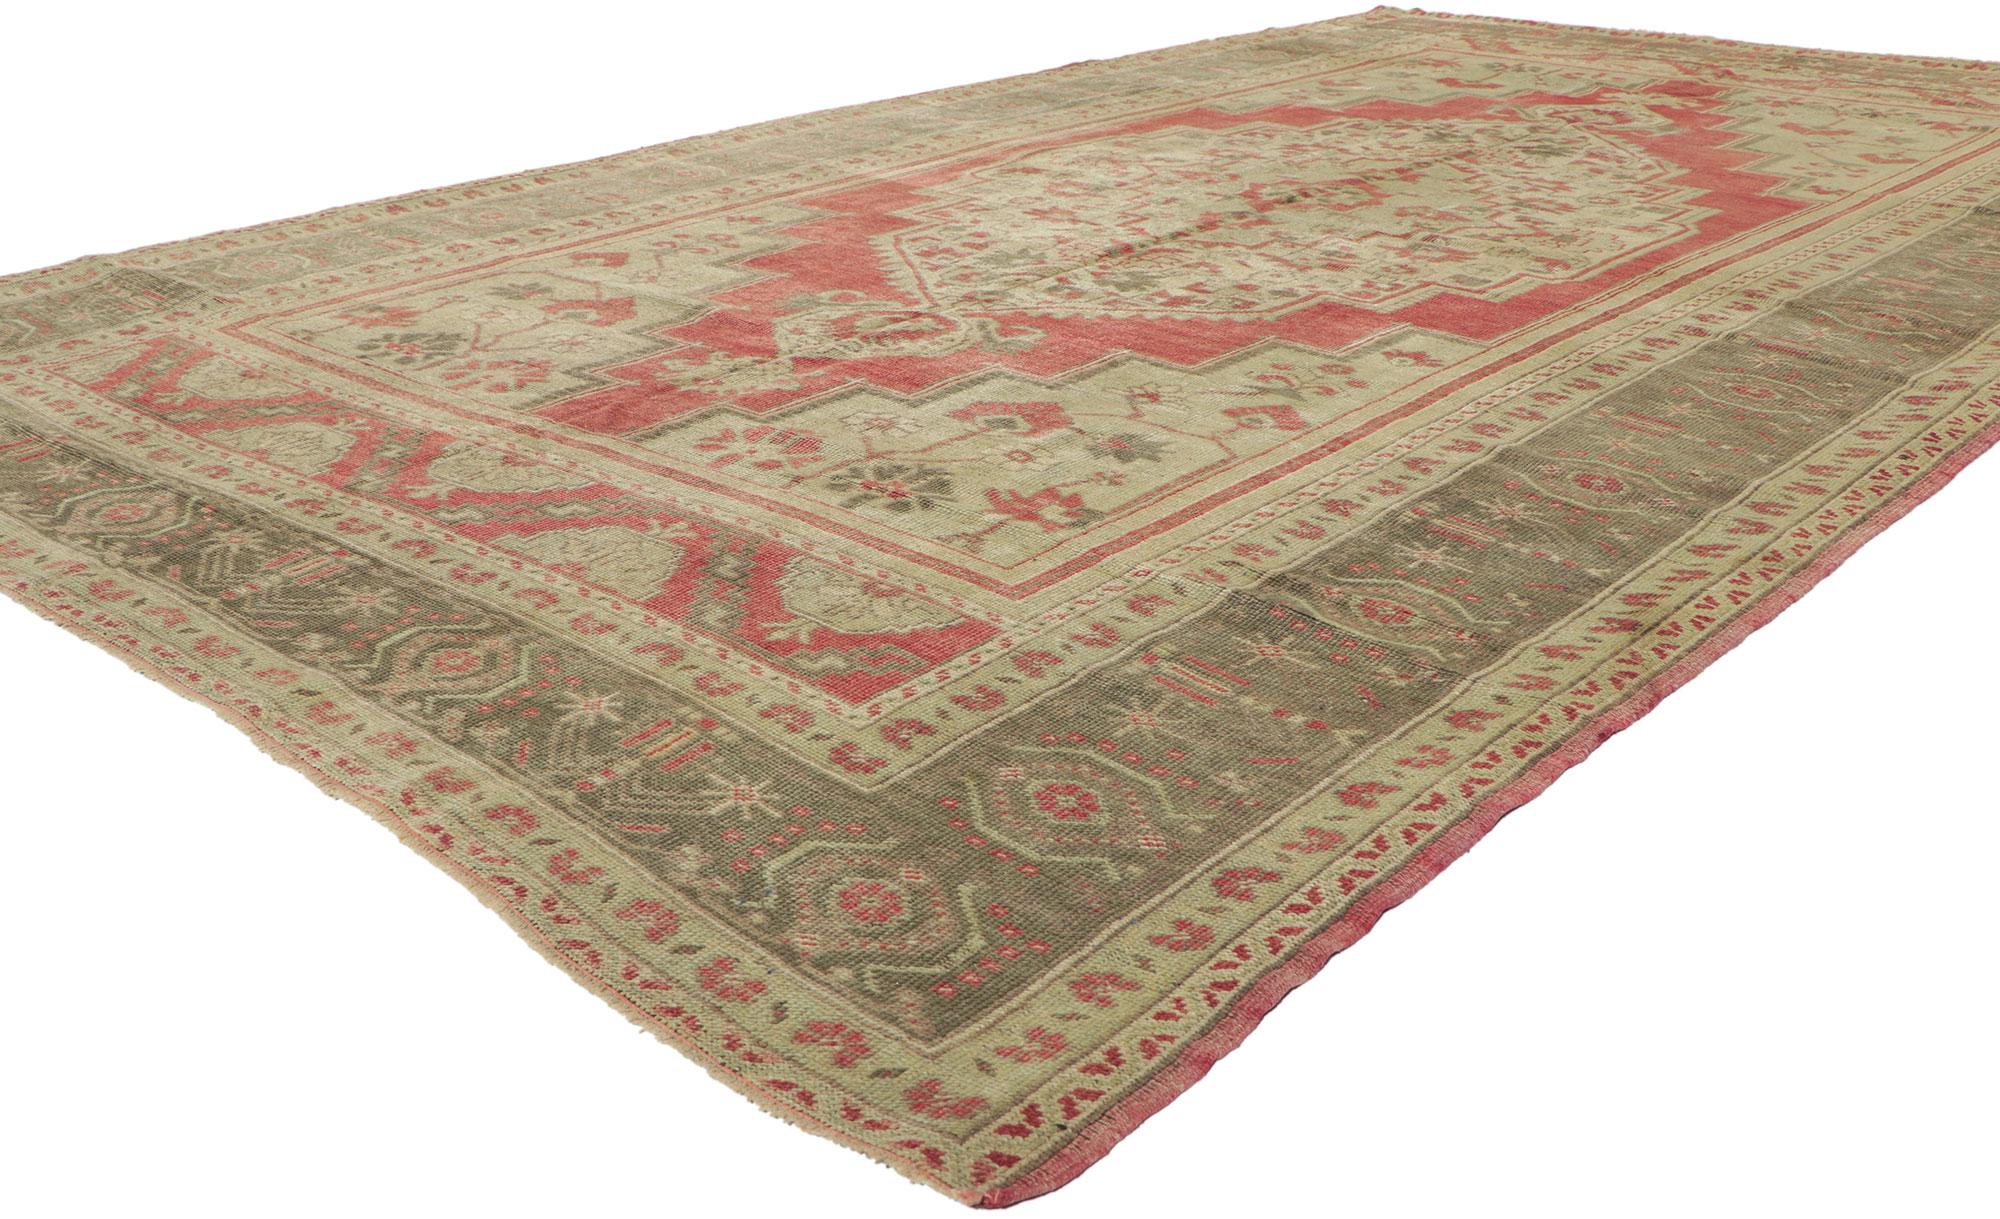 51367 vintage Turkish Oushak rug with Tudor style. This hand knotted wool vintage Turkish Oushak rug features an oversized stepped hexagonal medallion with blooming palmette pendants floating in the center of an abrashed brick red field. Gorgeous